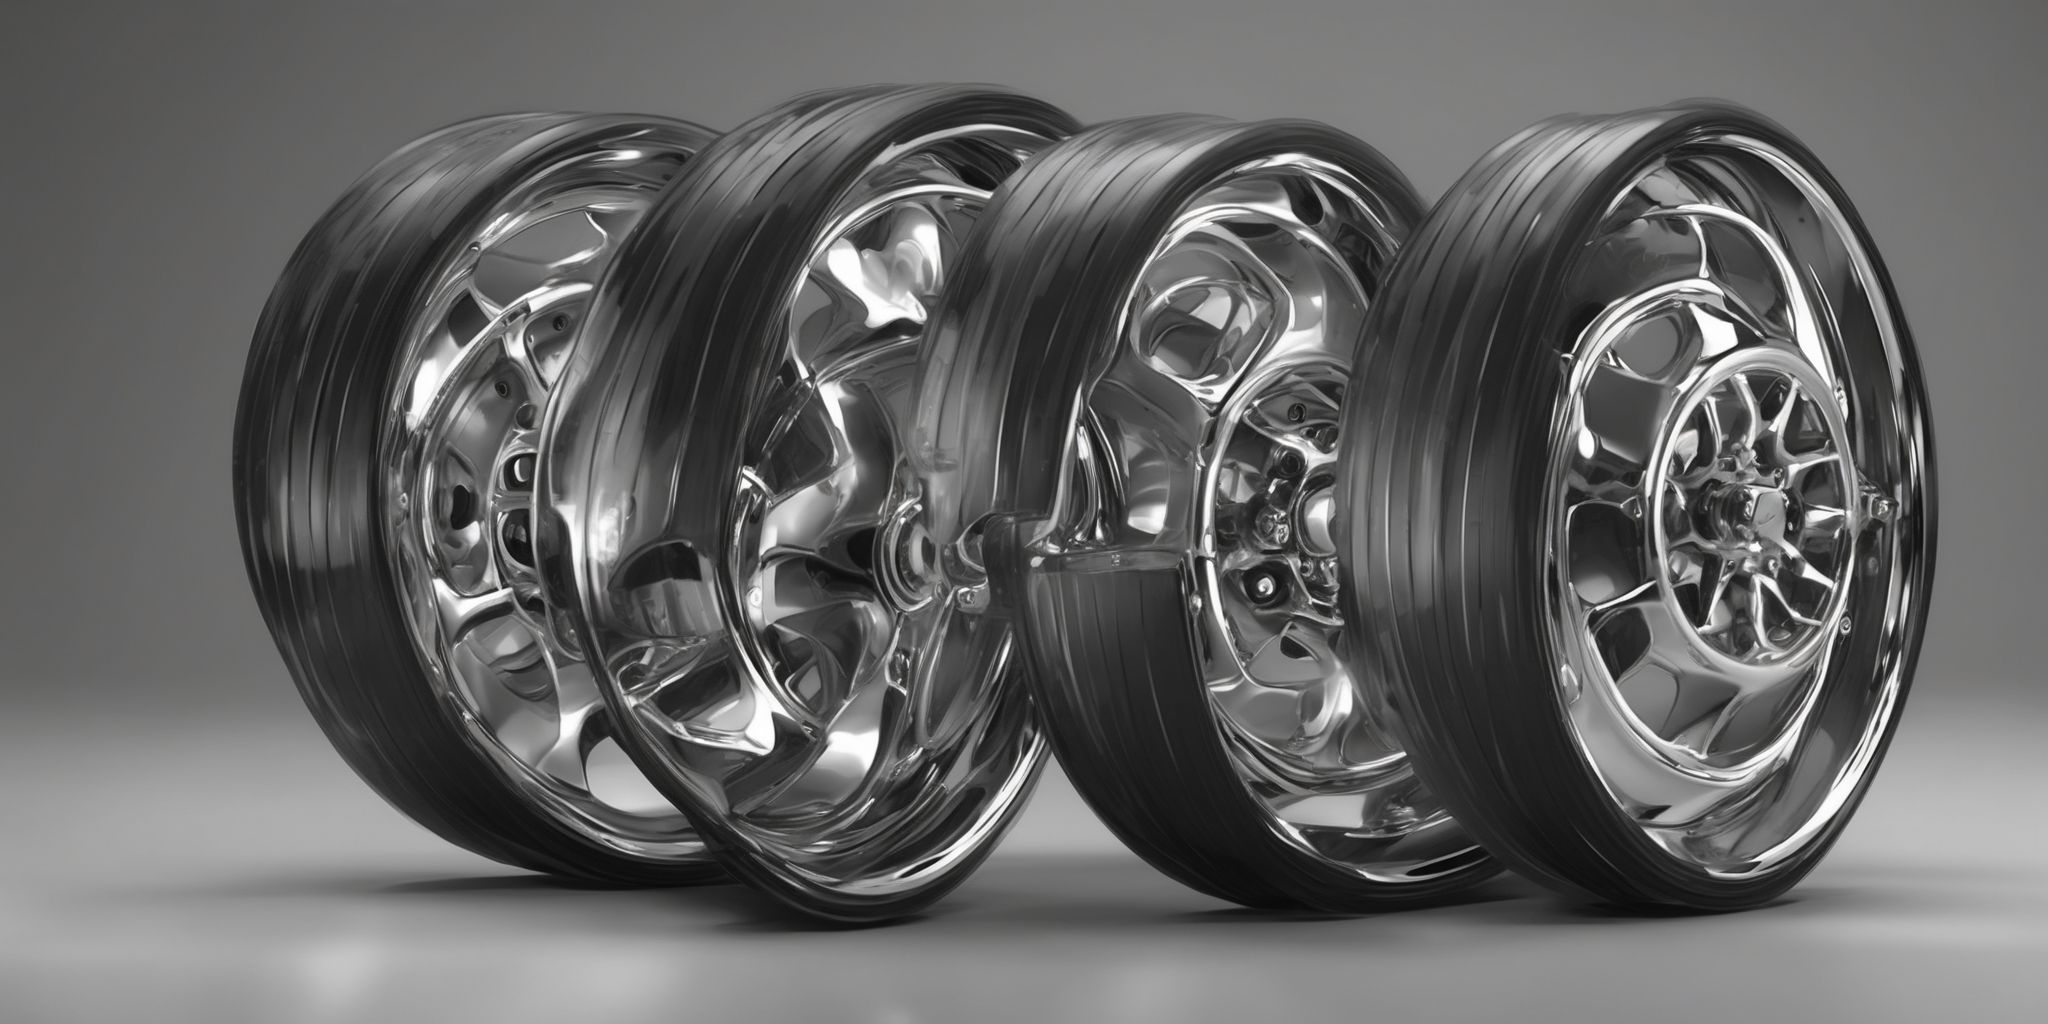 Wheels  in realistic, photographic style